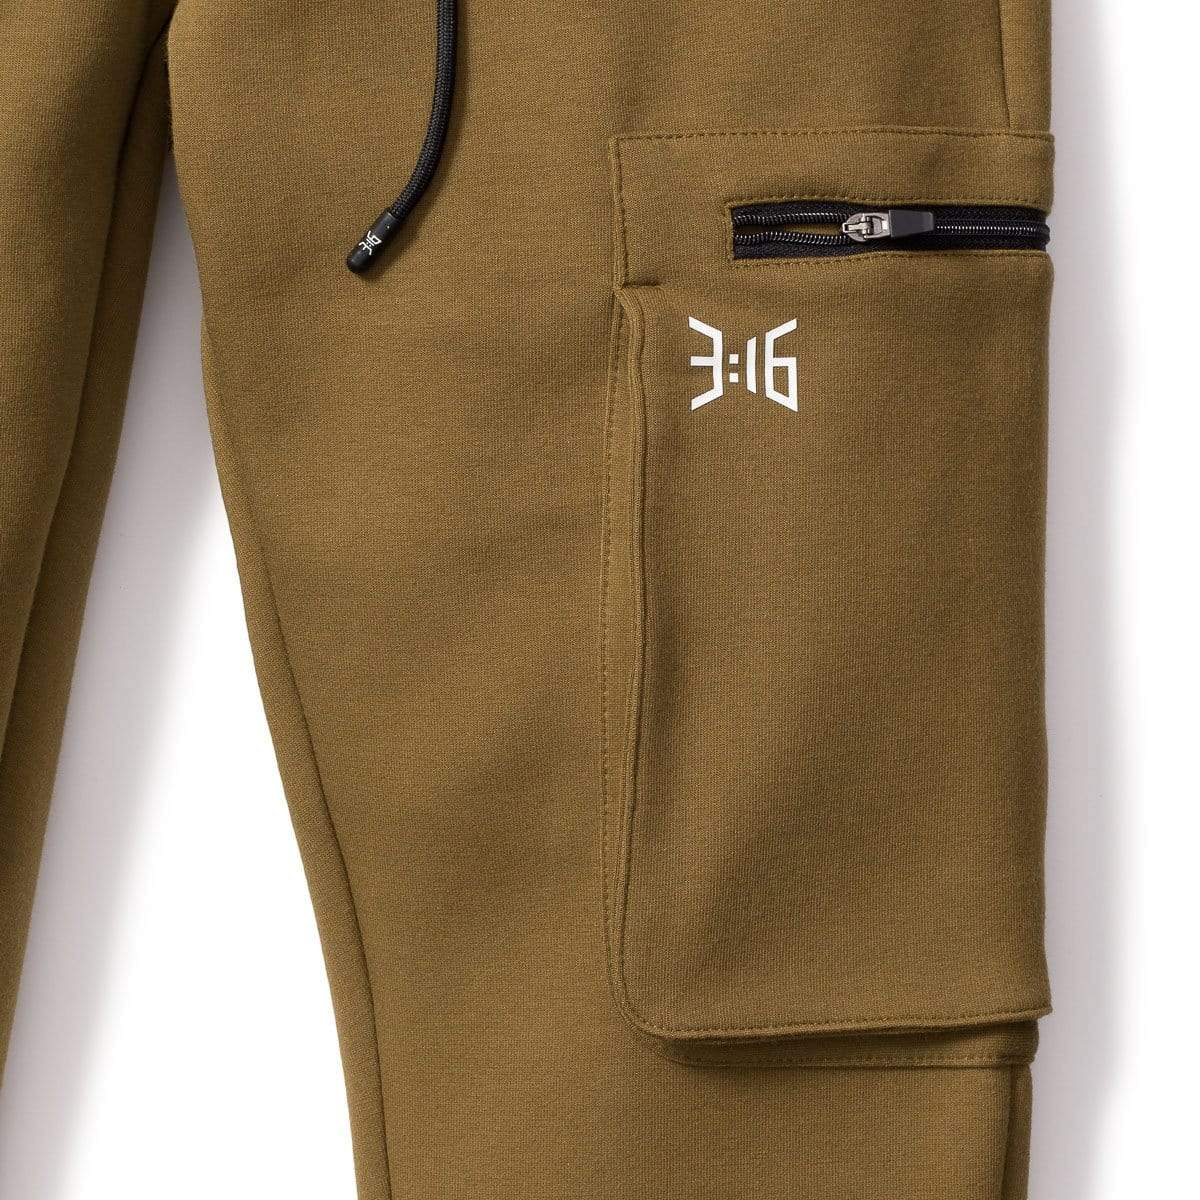 3:16 Collection Joggers SM 3:16 Cargo Joggers - Army Green